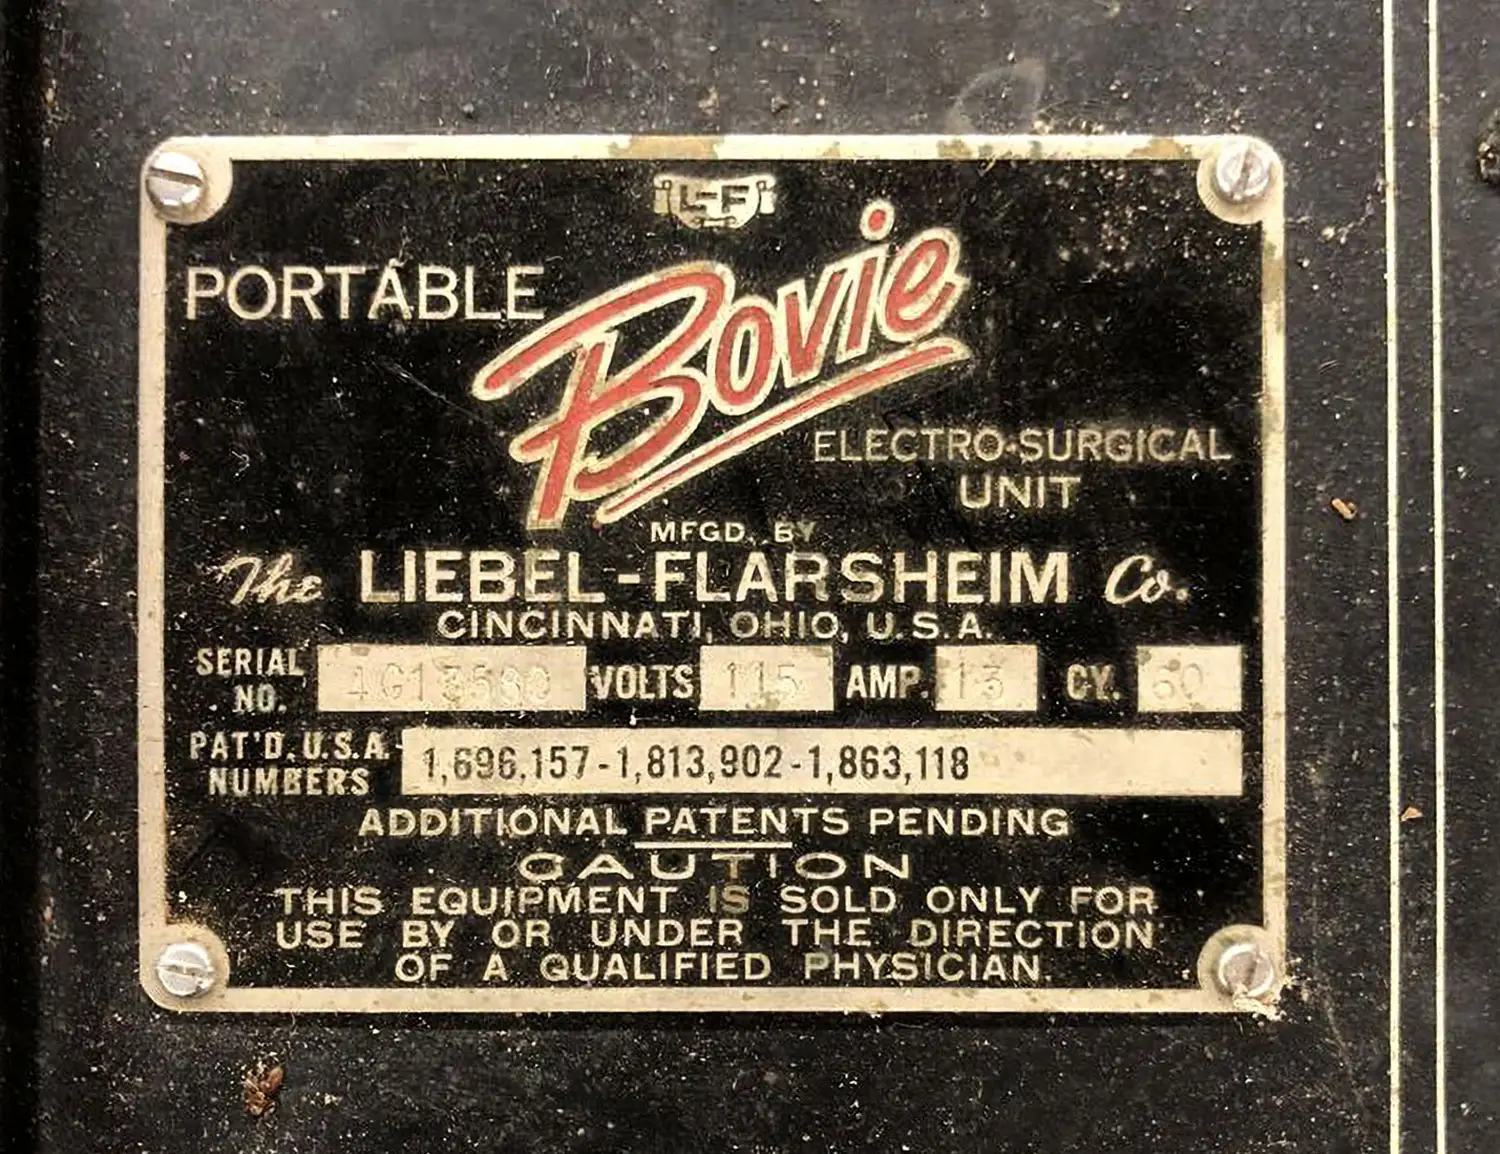 Black and gold metal nameplate that says “Portable Bovie Electro-Surgical Unit” and additional information related to its serial number, voltage, etc. It has a dirty and worn look.